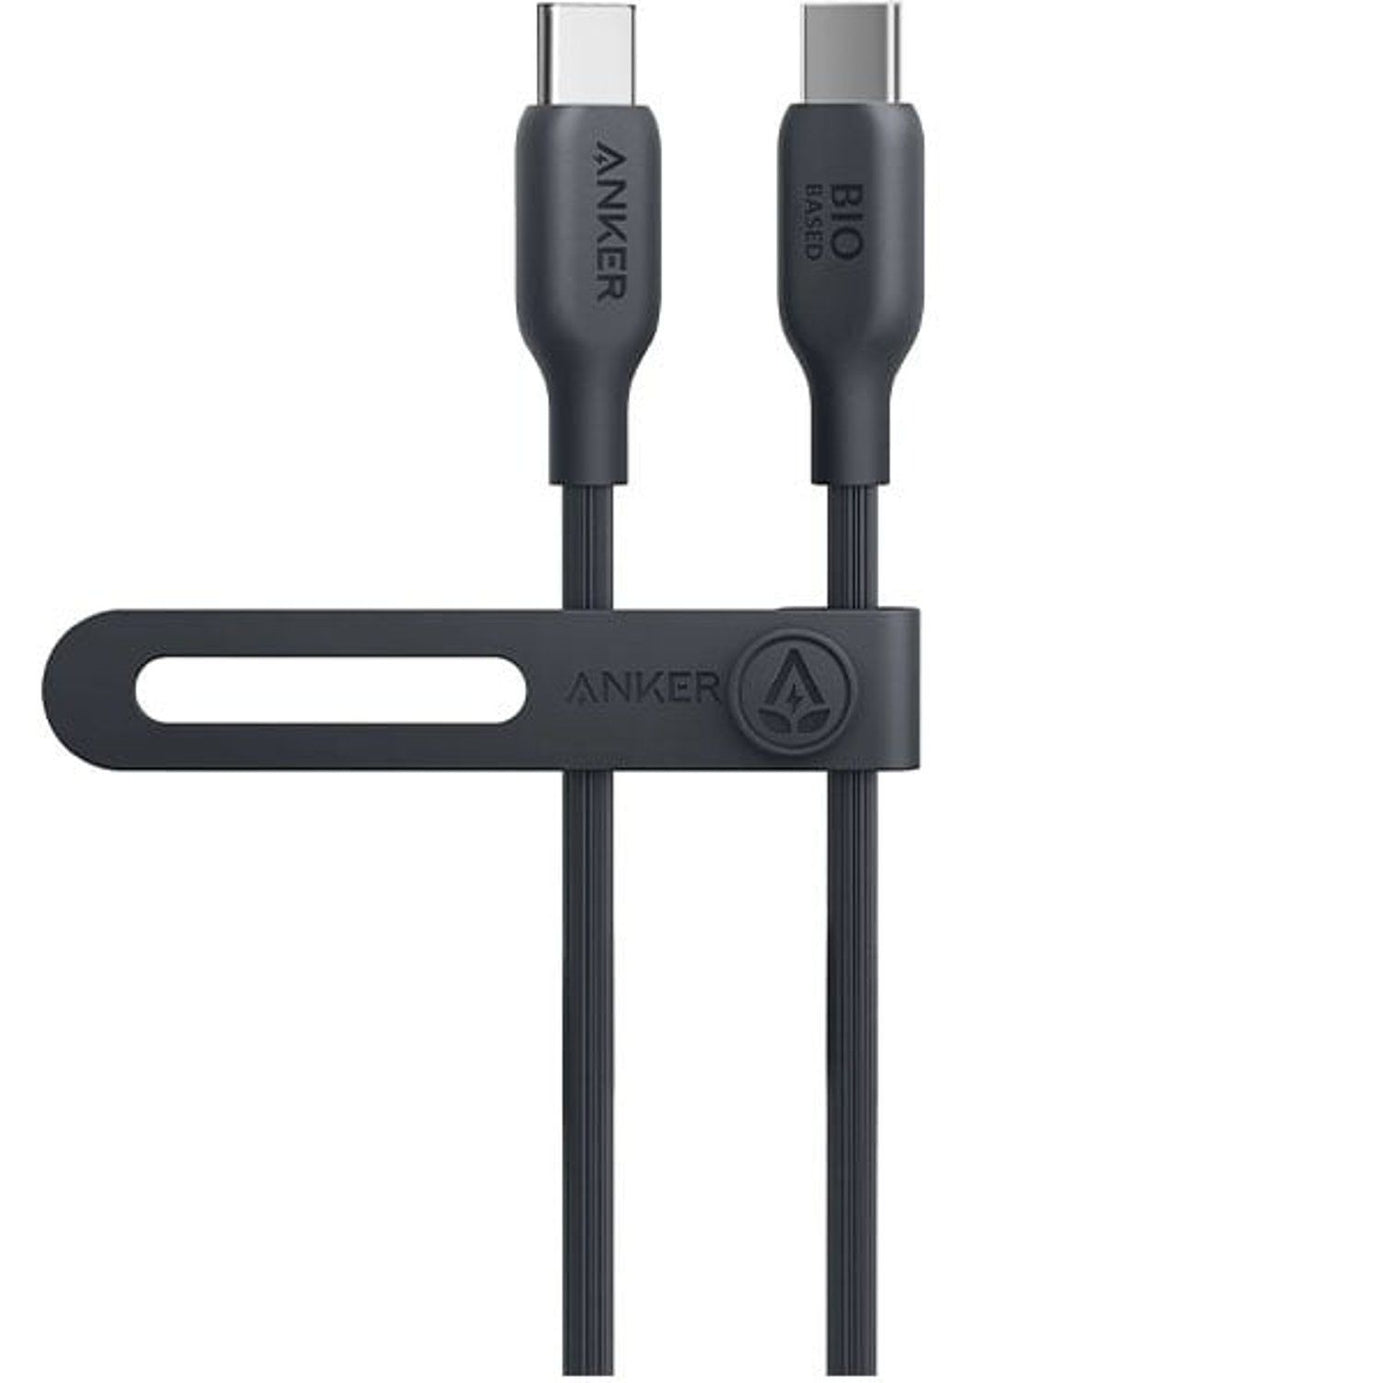 Anker 544 USB-C to USB-C Cable (Bio-Based) 3ft - Black | A80F1H11